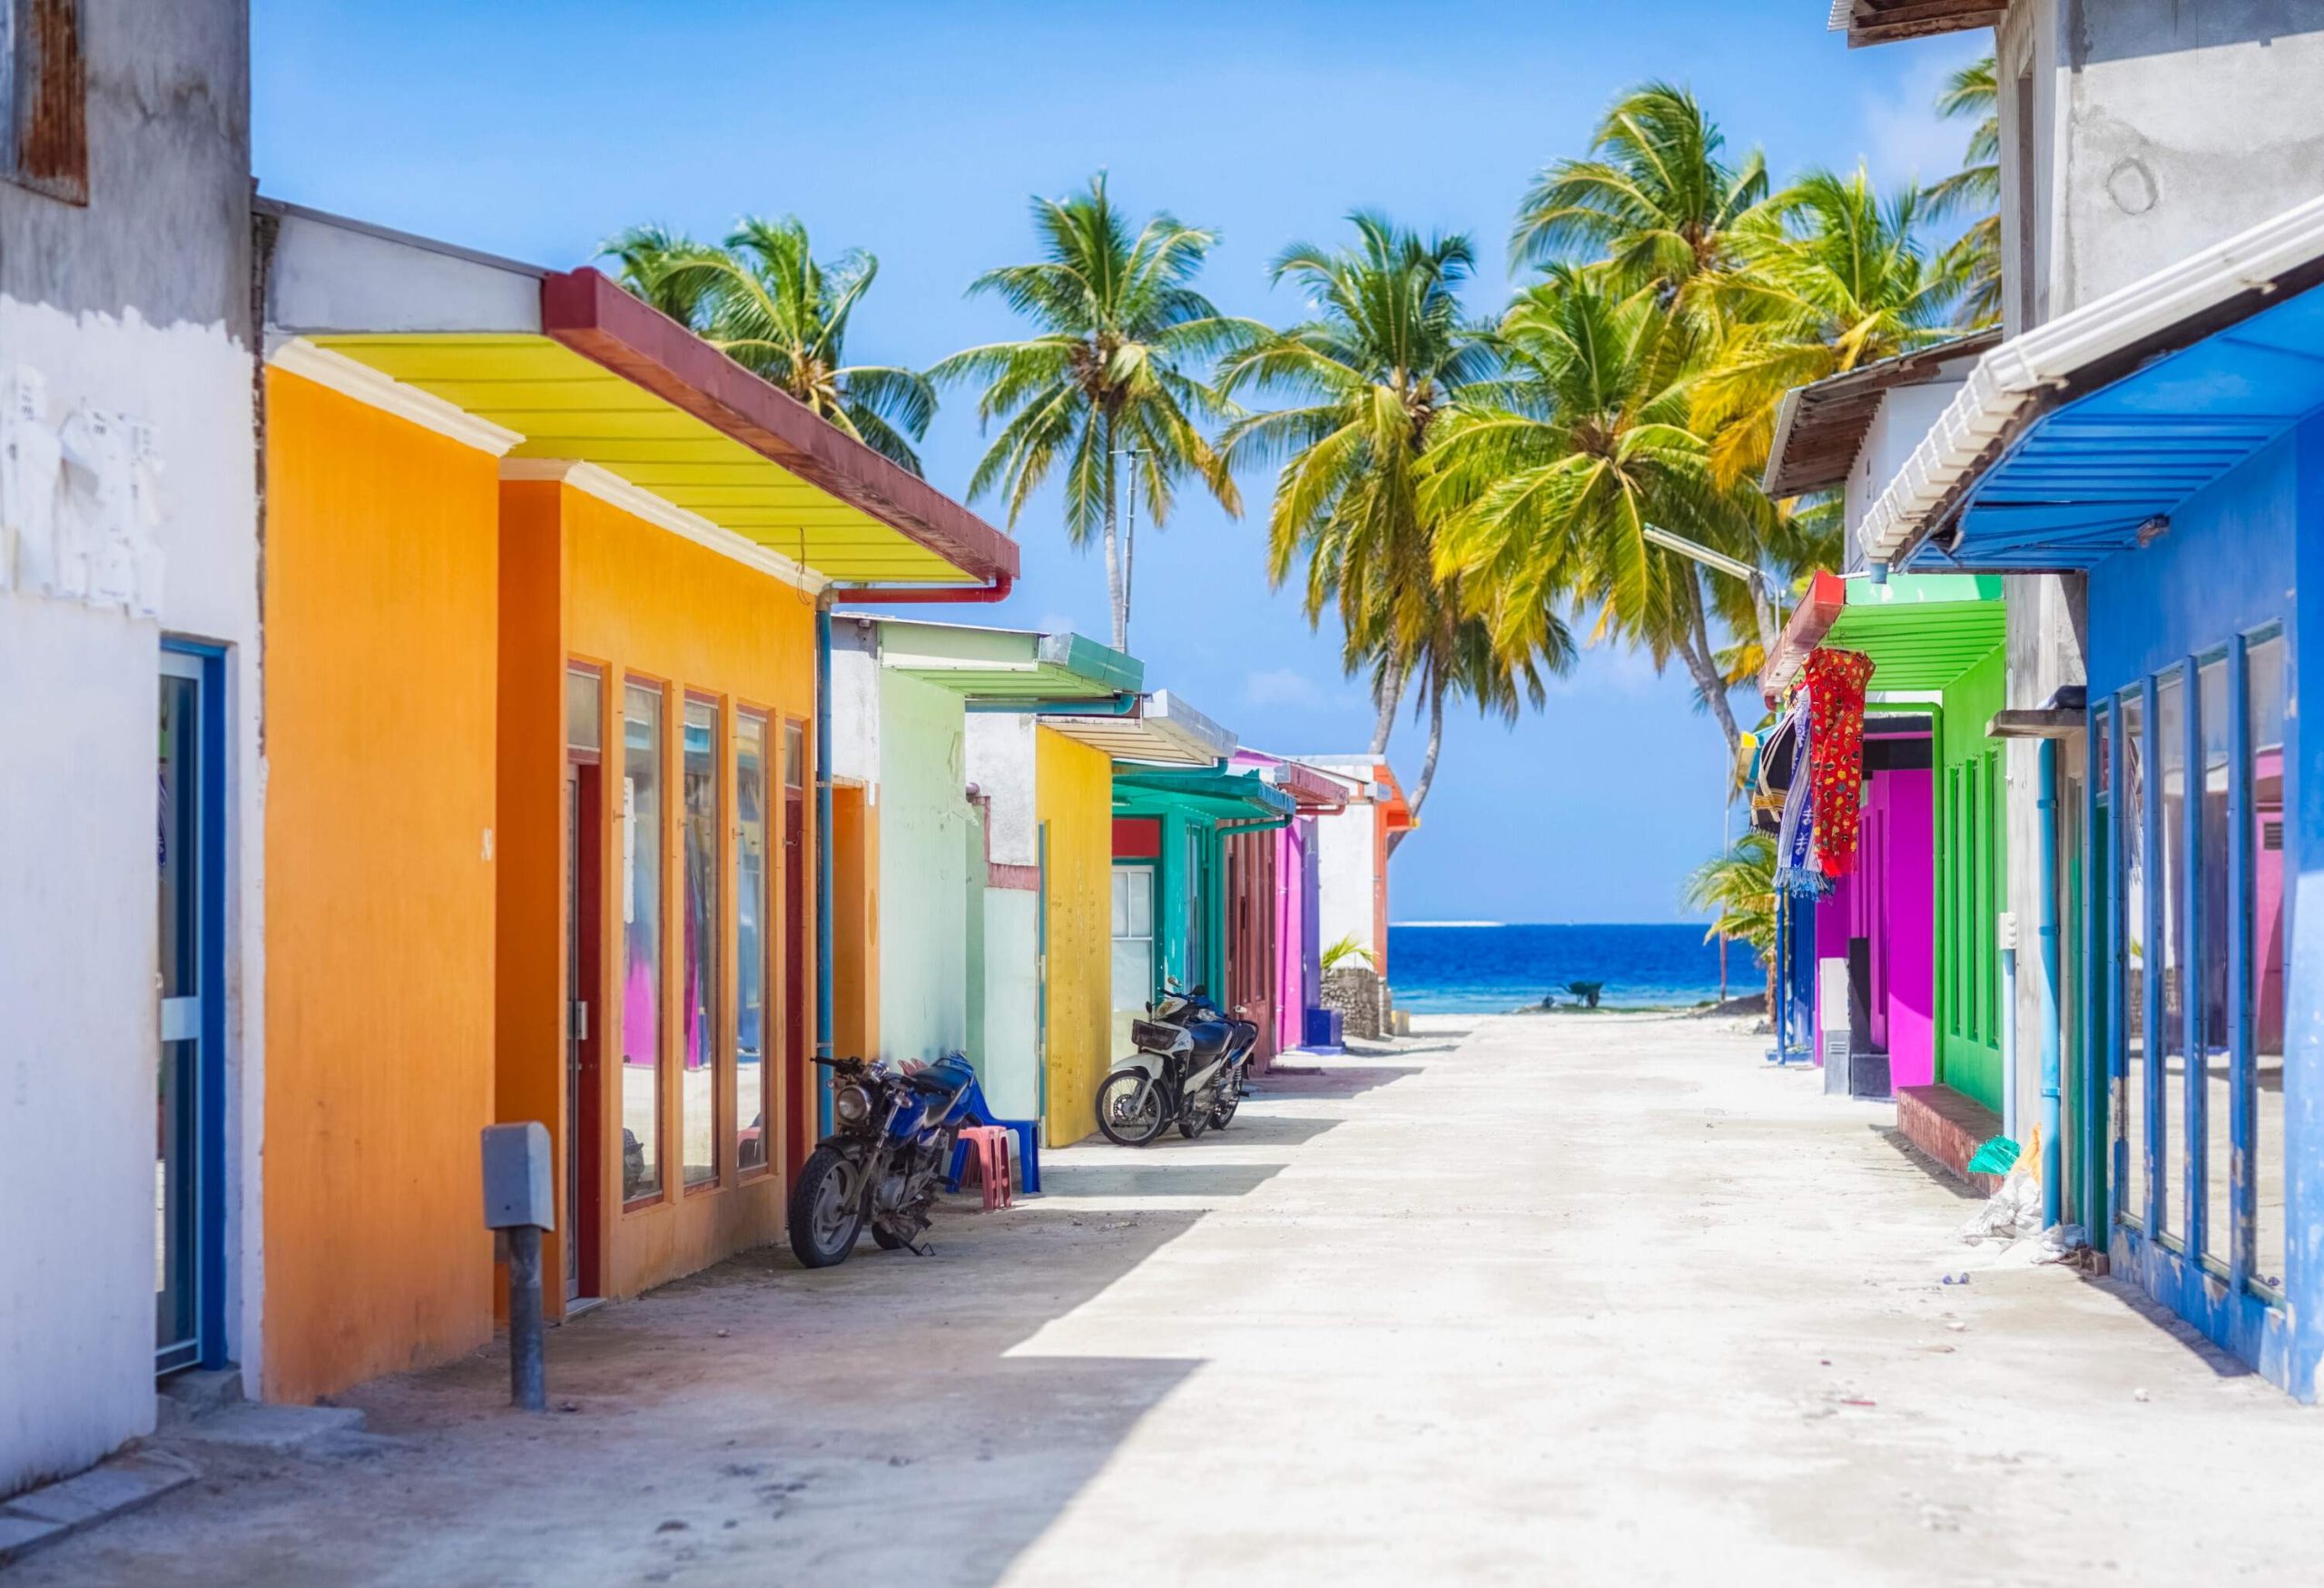 A coastal village with vibrantly painted houses along the street that opens up to the sea.